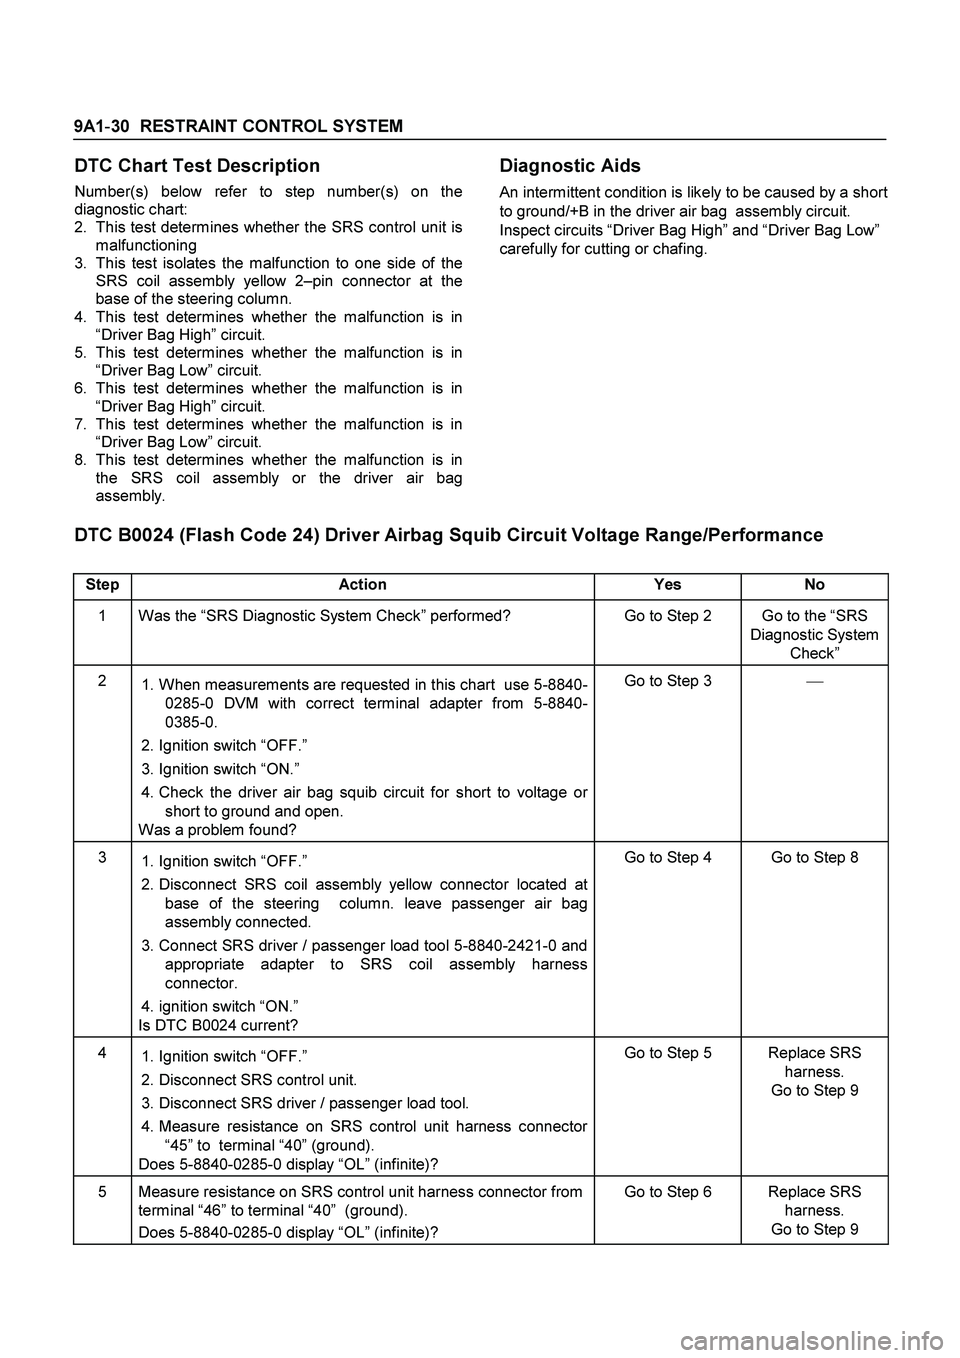 ISUZU TF SERIES 2004  Workshop Manual 9A1-30  RESTRAINT CONTROL SYSTEM
 
DTC Chart Test Description 
Number(s) below refer to step number(s) on the
diagnostic chart: 
2. 
This test determines whether the SRS control unit is
malfunctioning